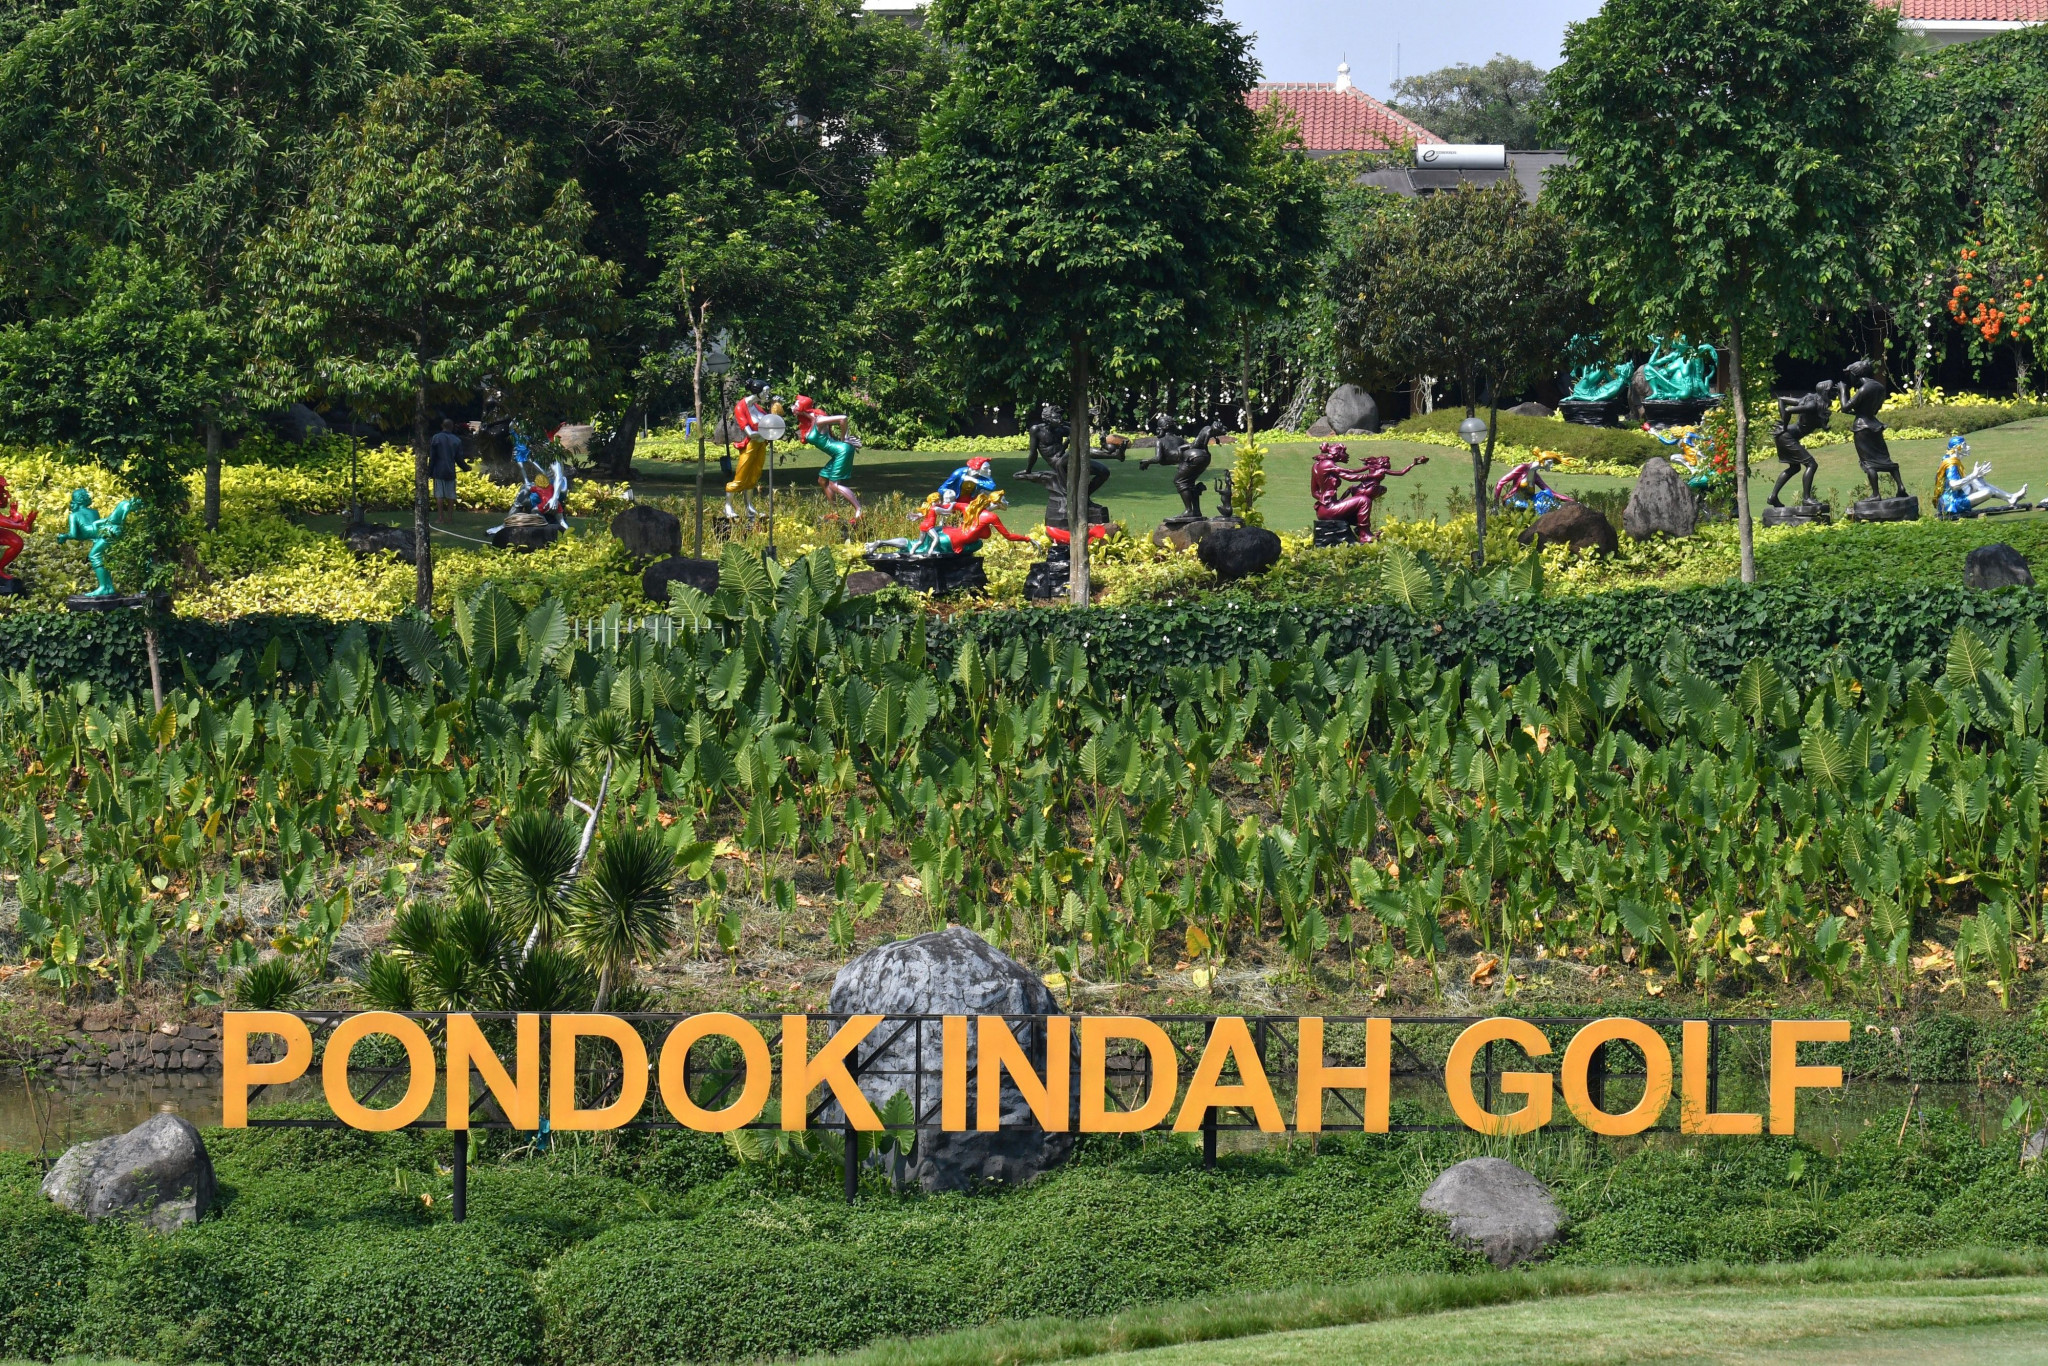 The Pondok Indah Golf and Country Club will play host to the sport at the 2018 Asian Games ©Getty Images